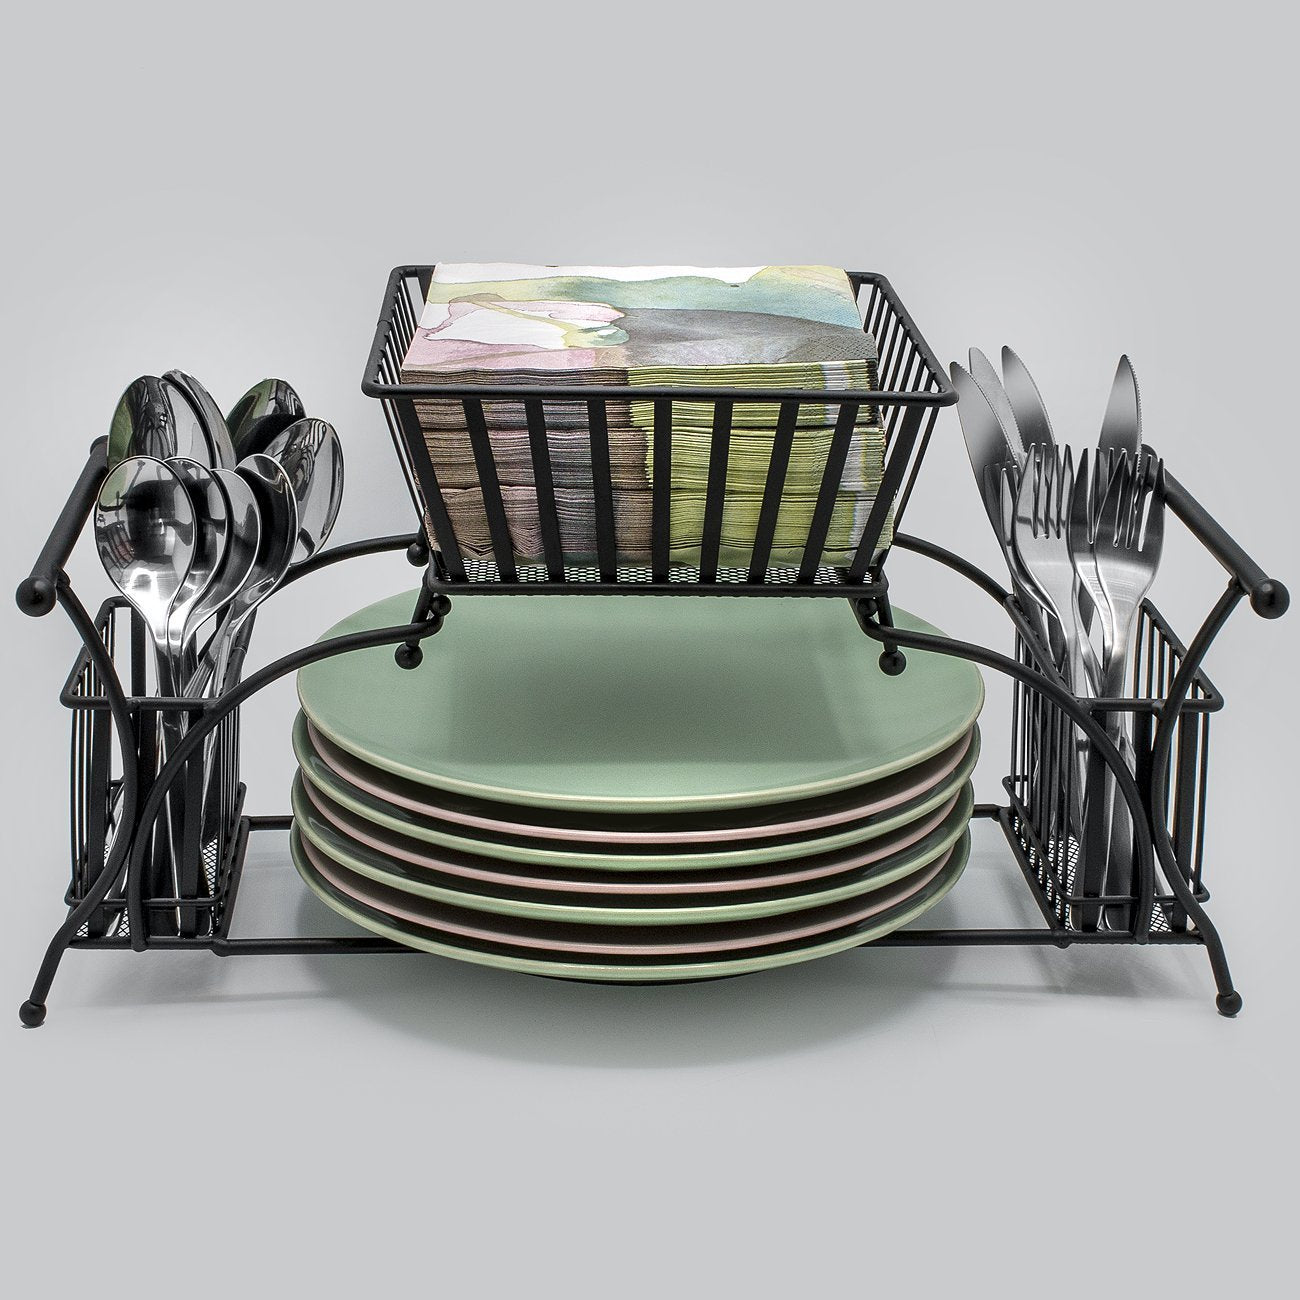 Discover the sorbus utensil caddy use for napkin cutlery plate holder stackable flatware caddy tabletop organizer ideal for dining table party buffet kitchen entertaining black